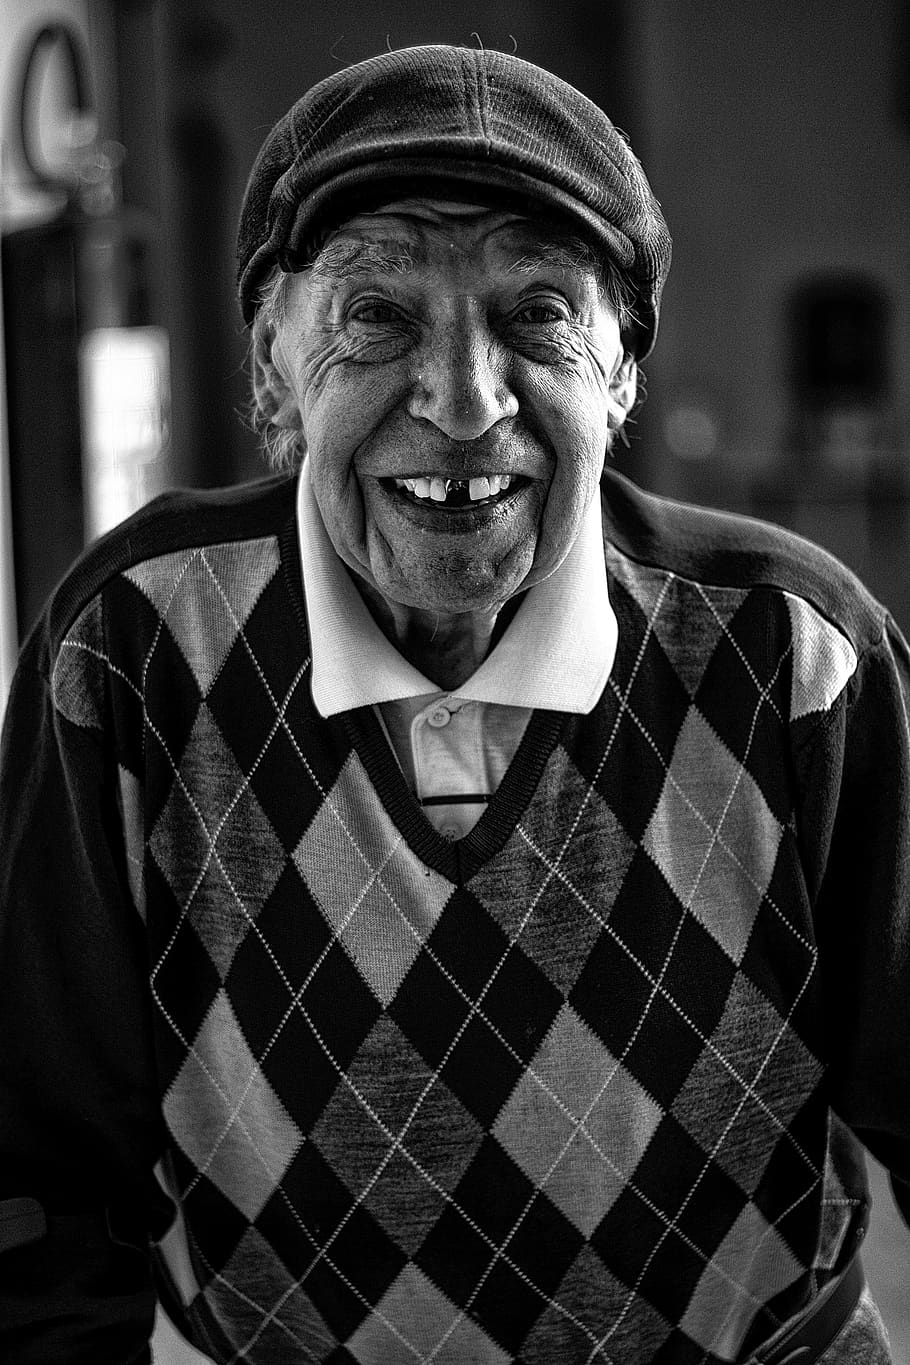 Man Wearing Newsboy Hat and Sweater, adult, black and white, black-and-white